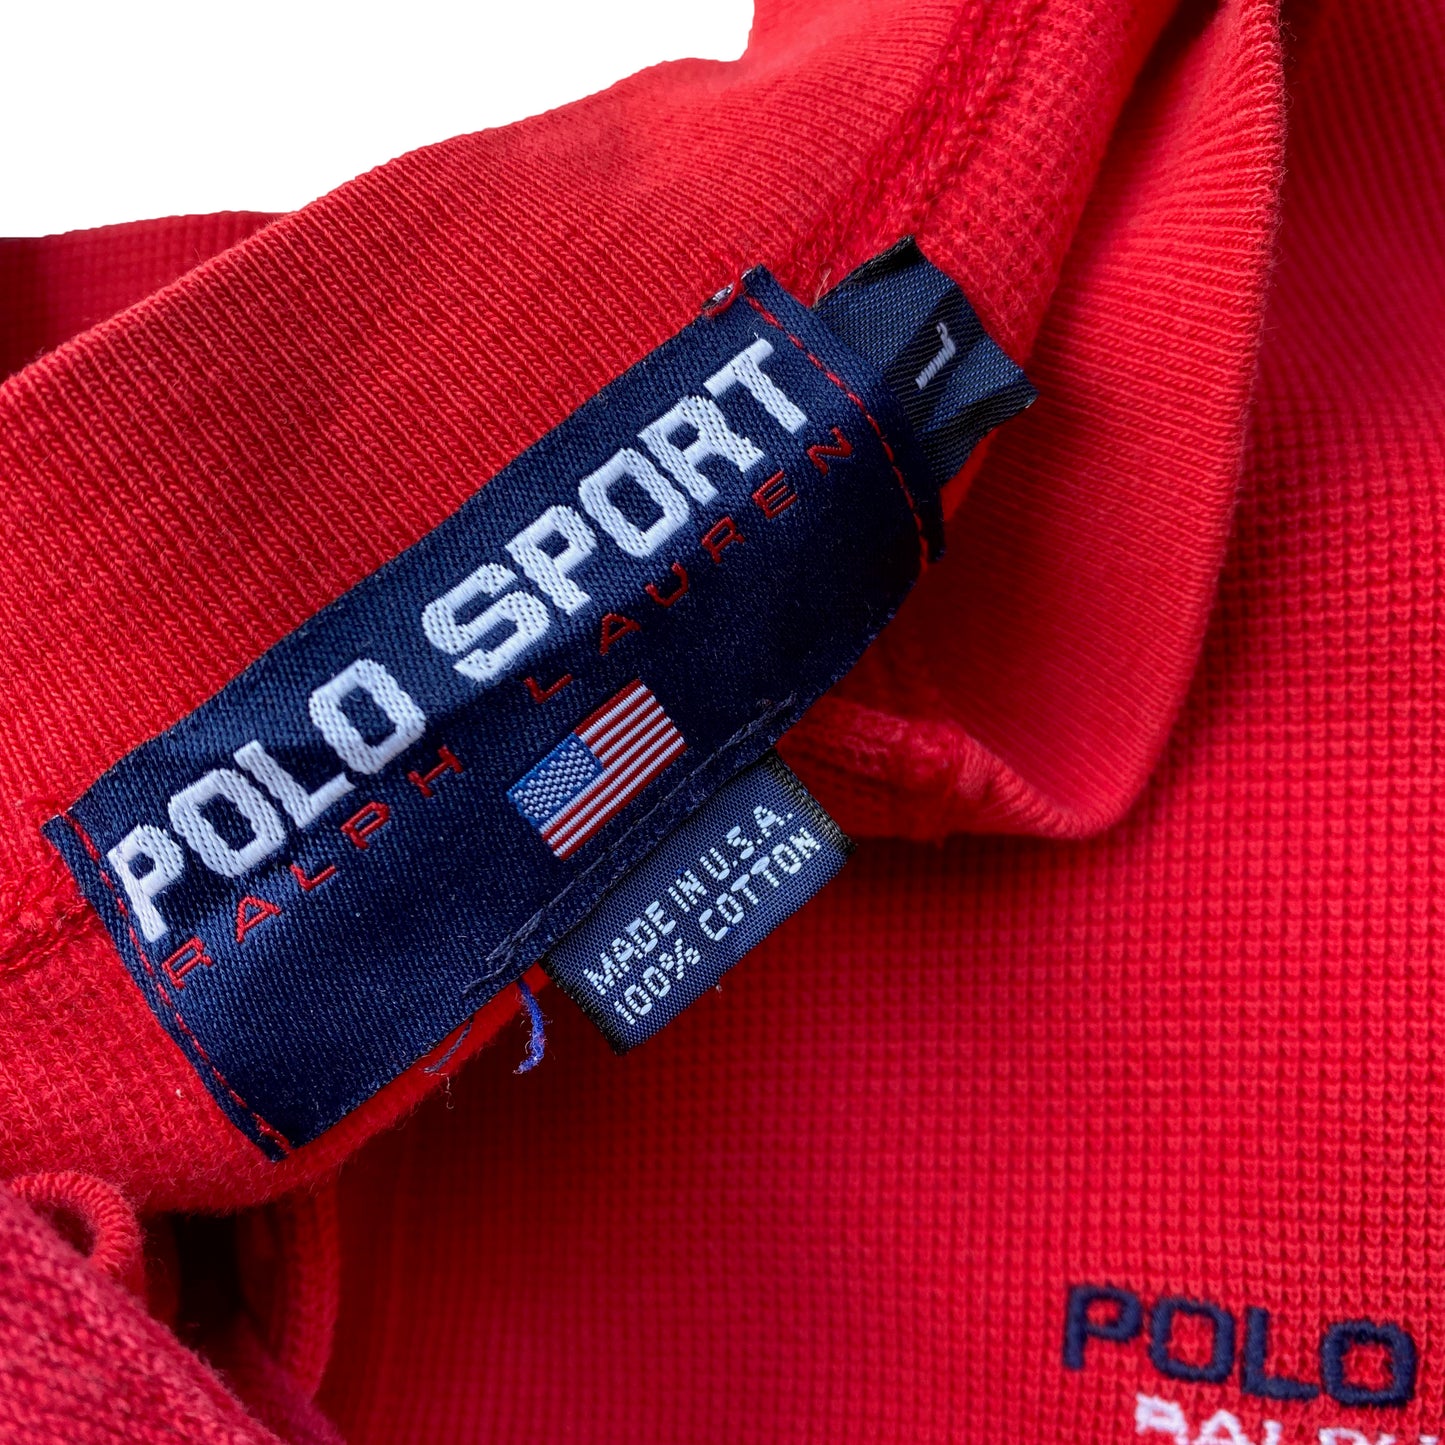 90's "POLO SPORT" THERMAL HENLEY NECK LONG SLEEVE T-SHIRT